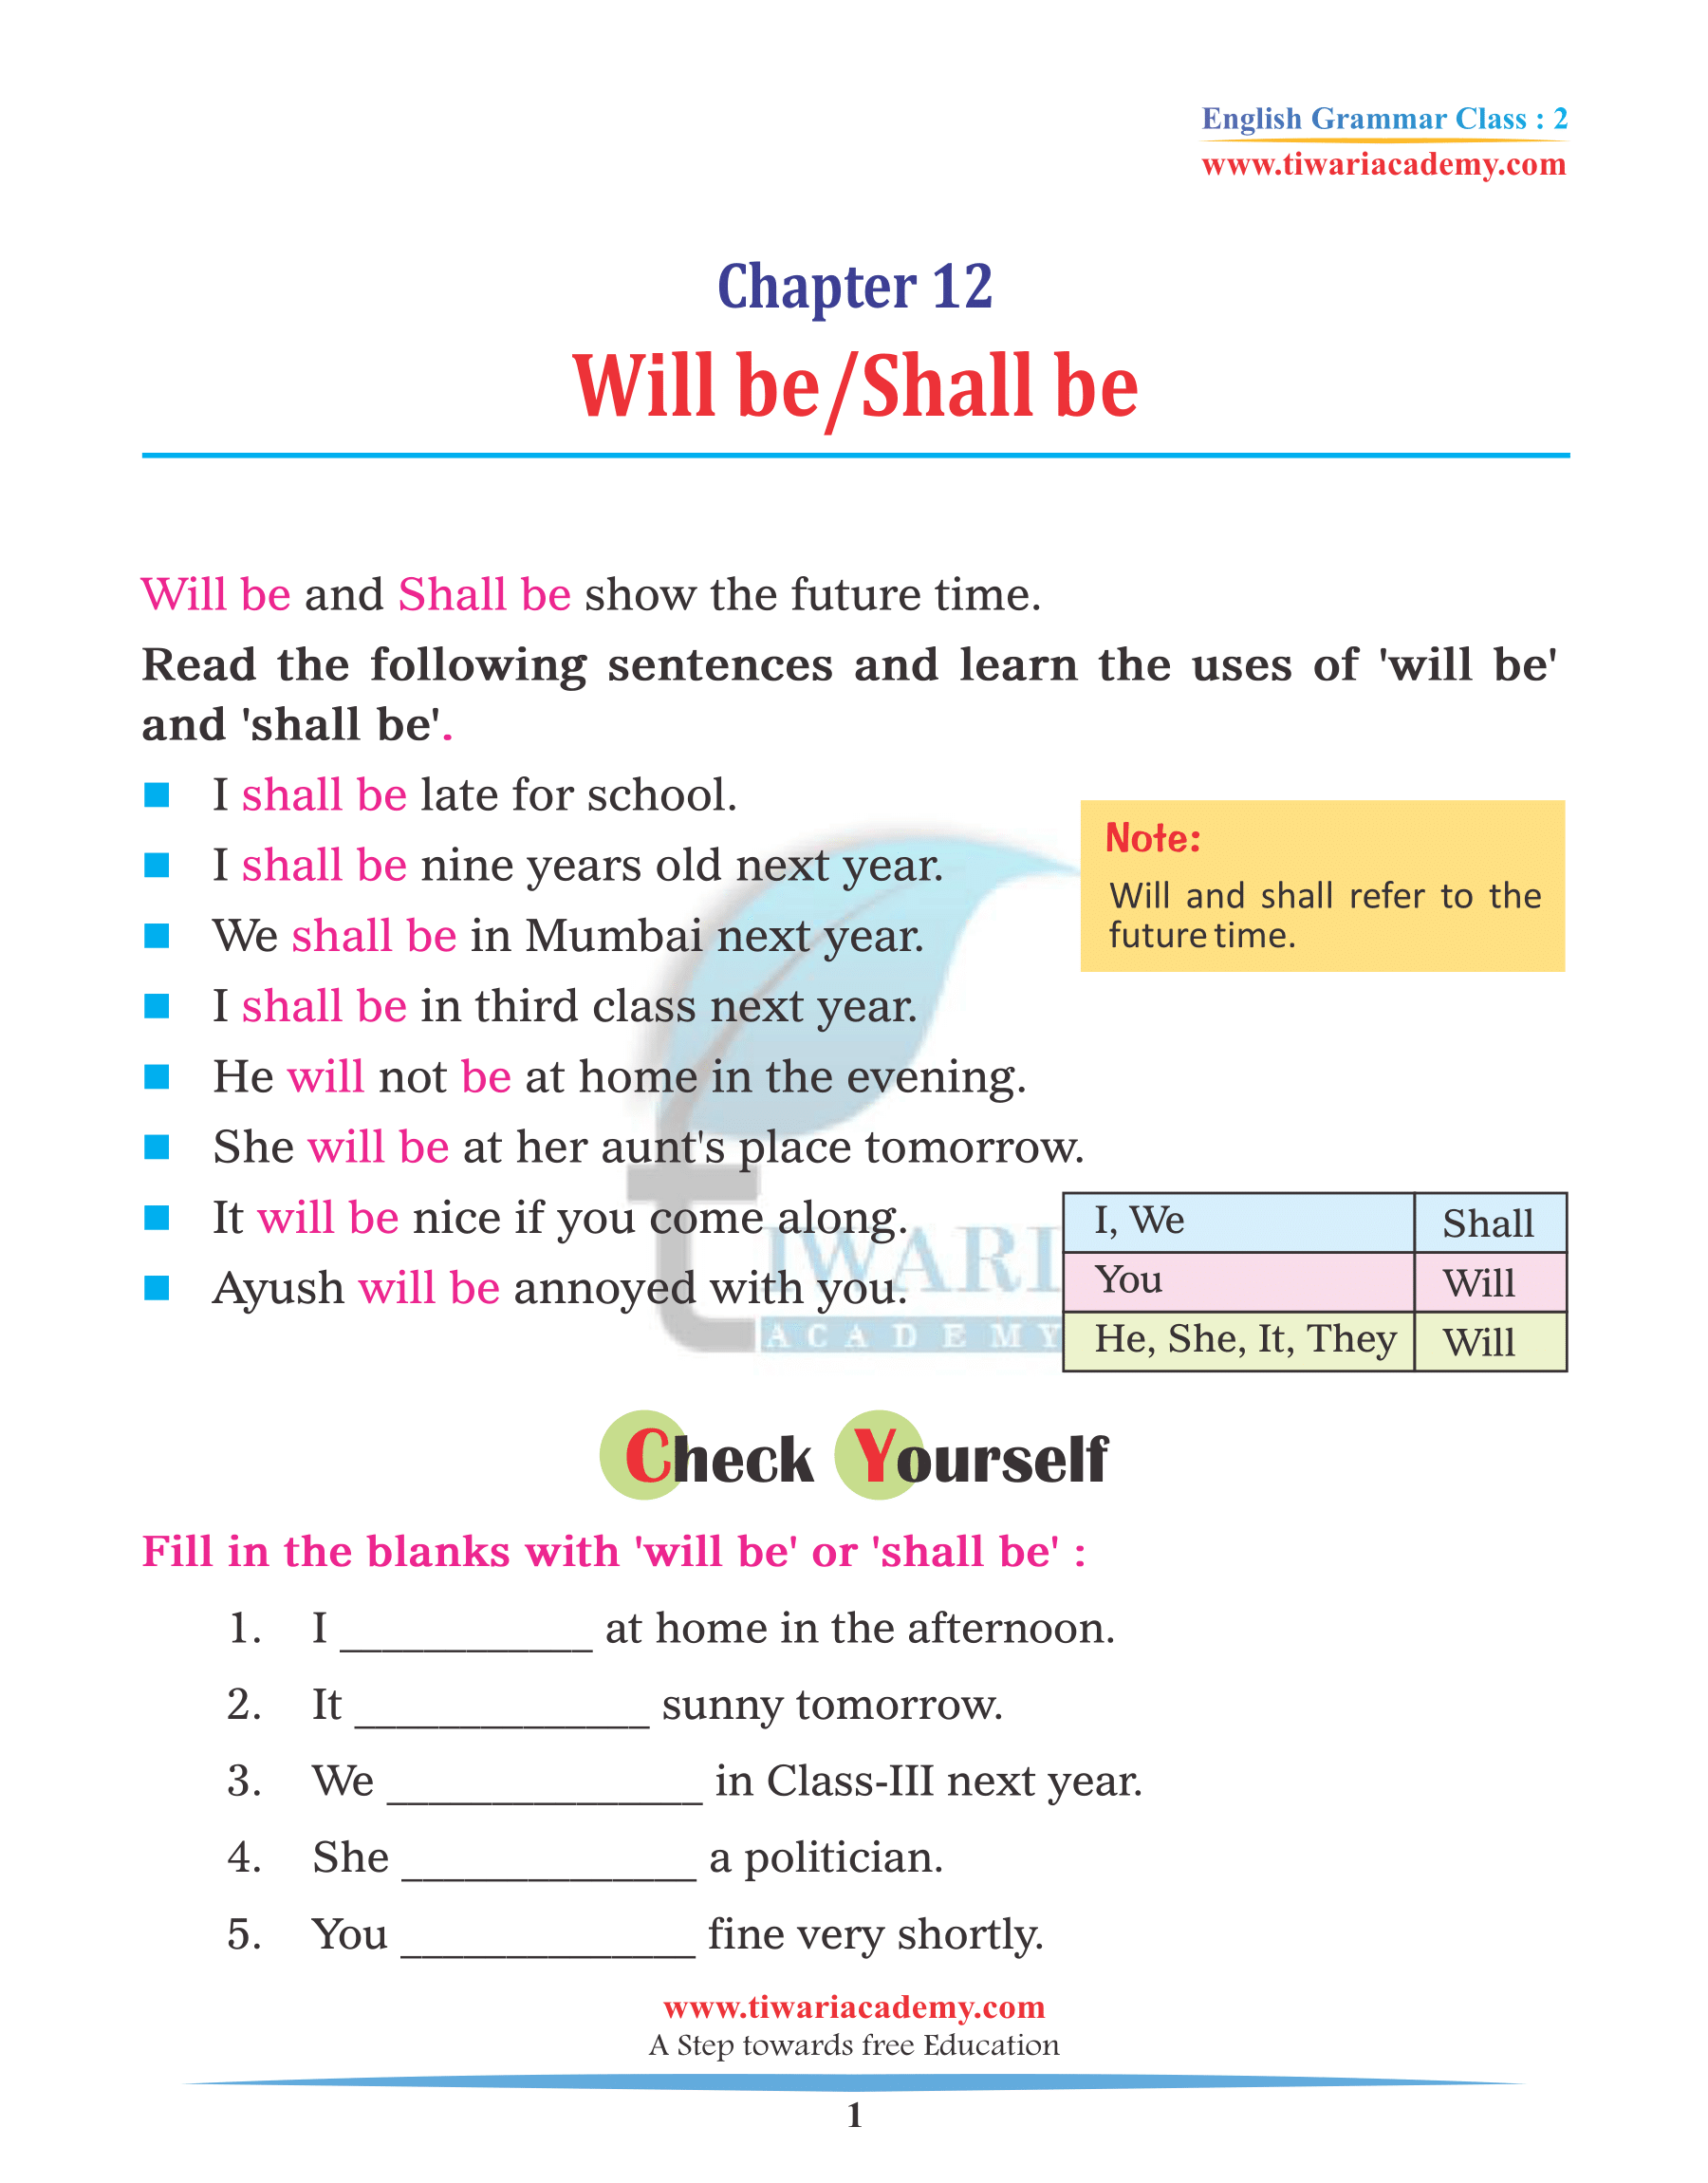 Class 2 English Grammar Chapter 12 Will be and Shall be